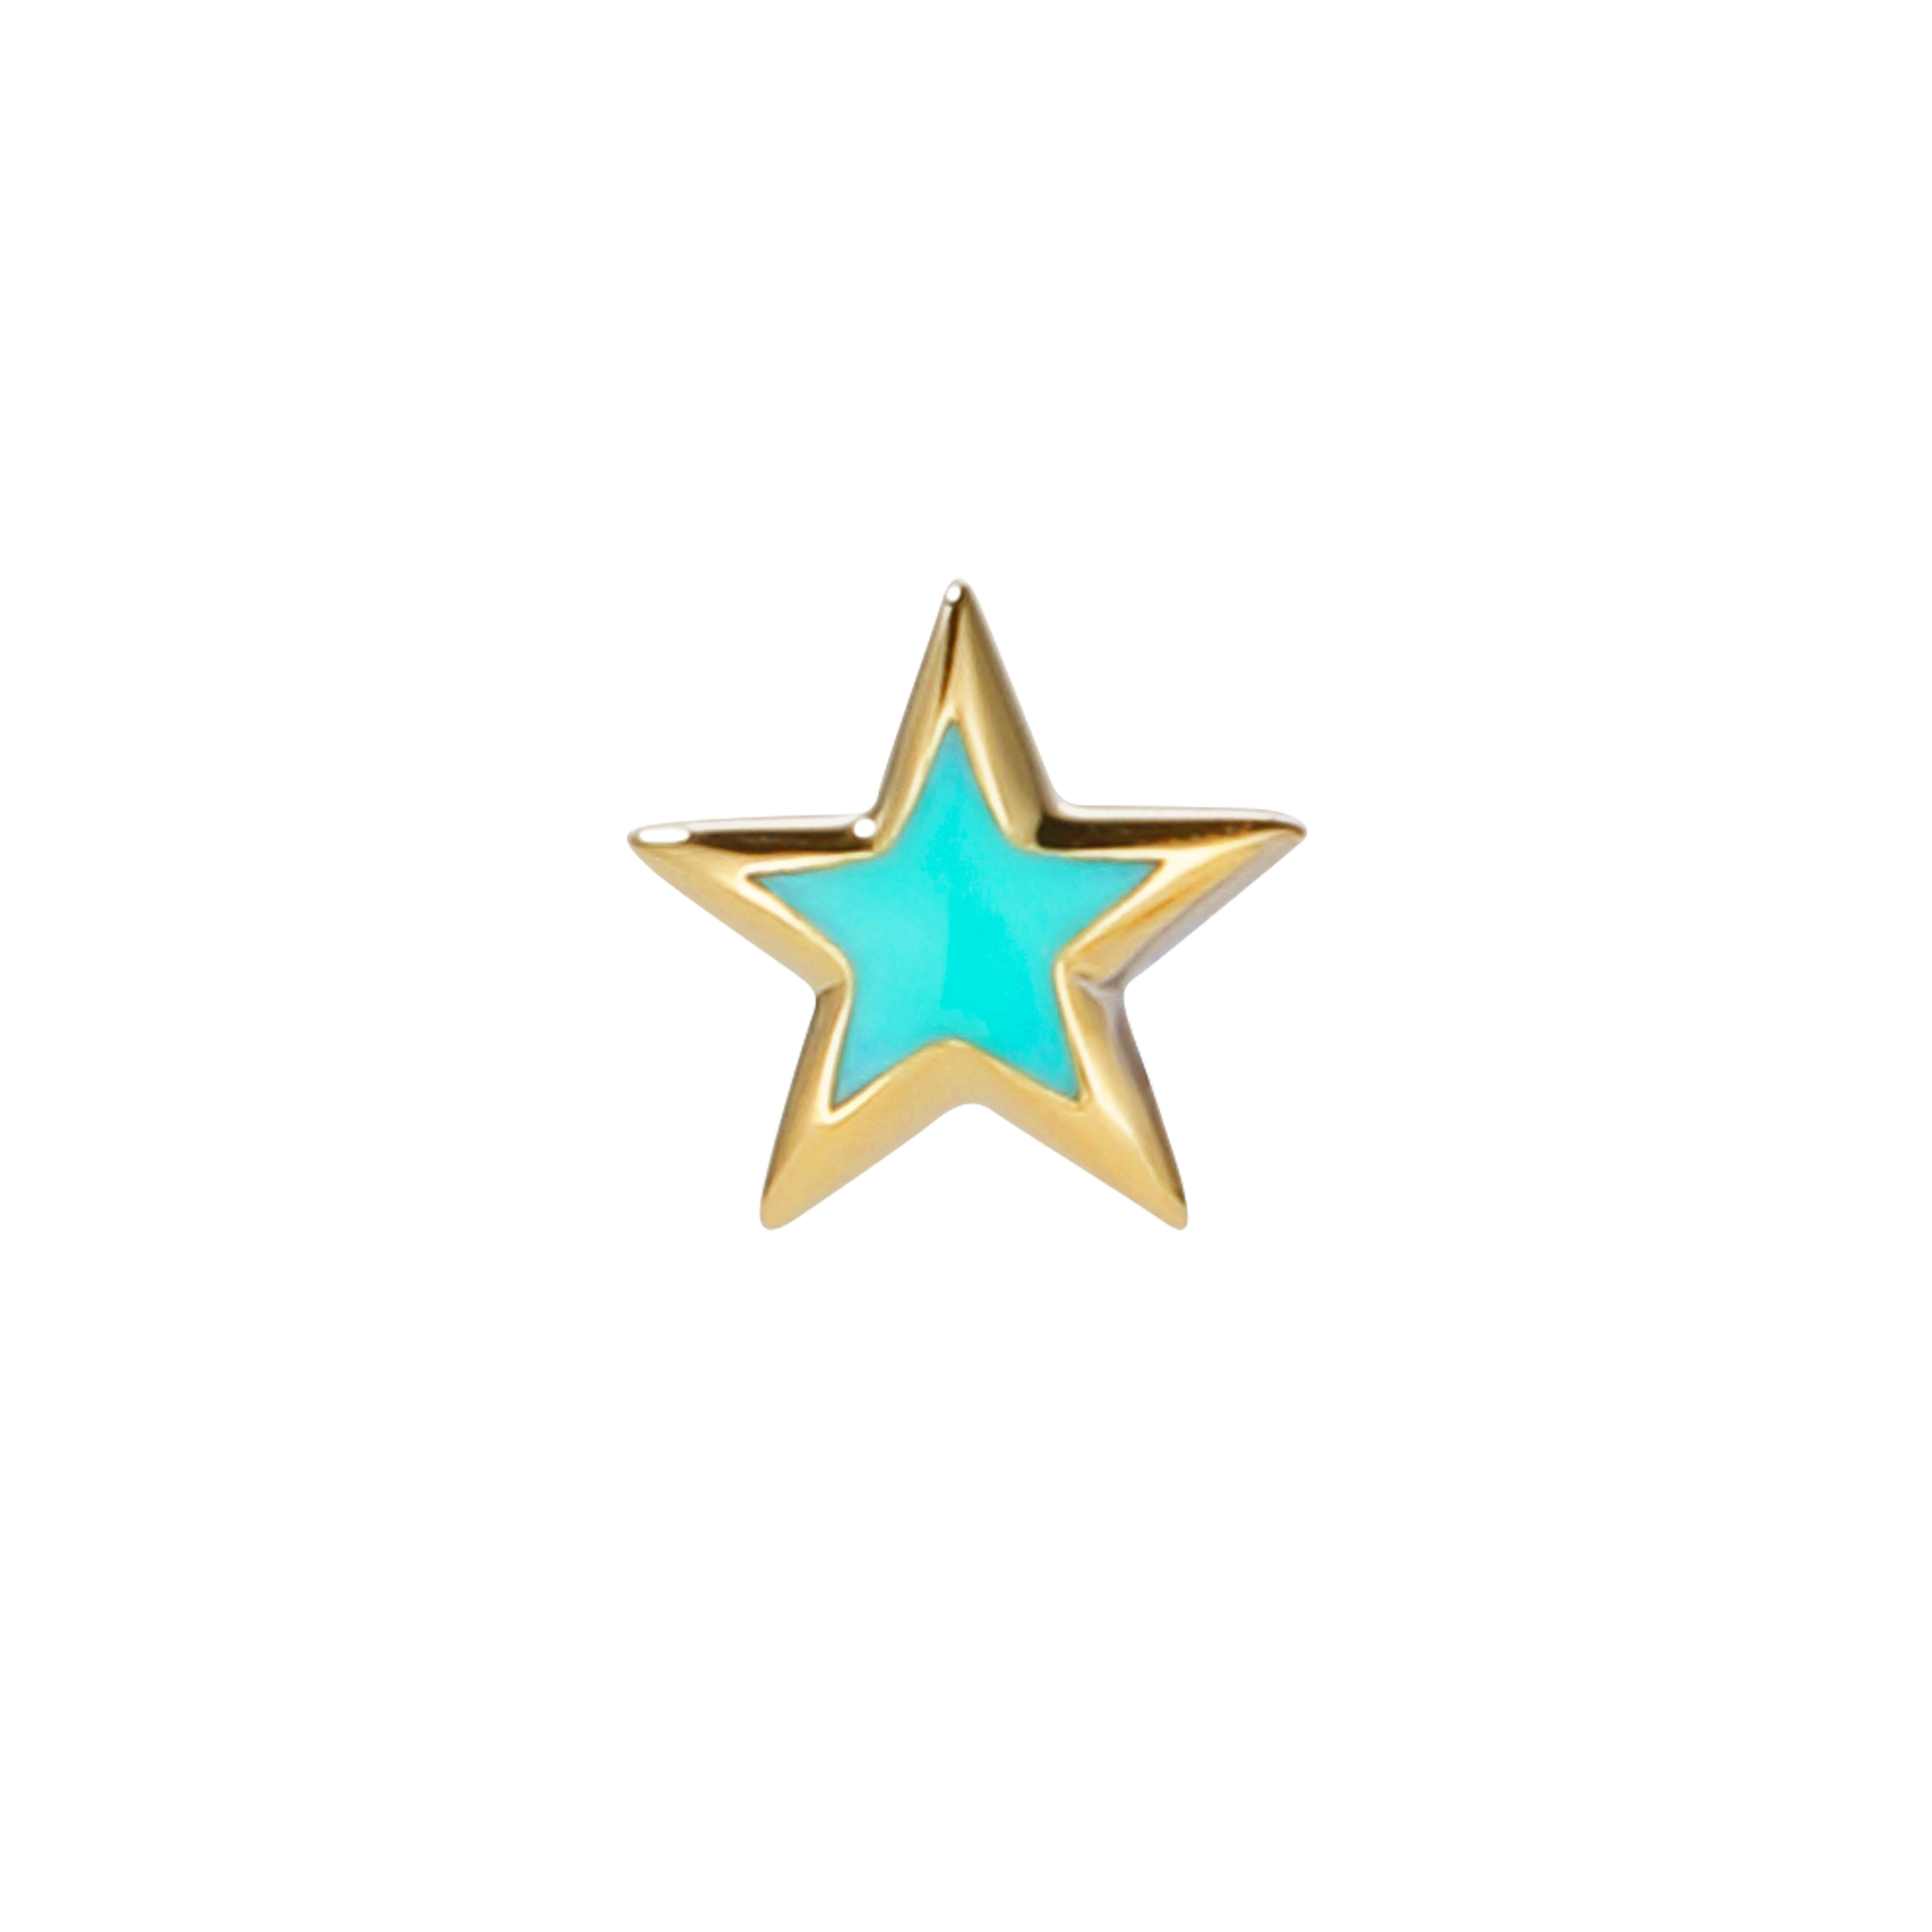 DETAILS
COLOR: Yellow gold
COMPOSITION: 14kt yellow gold
Star earrings, mint enamel fill
Post back

SIZE AND FIT
Star 7 x 7mm